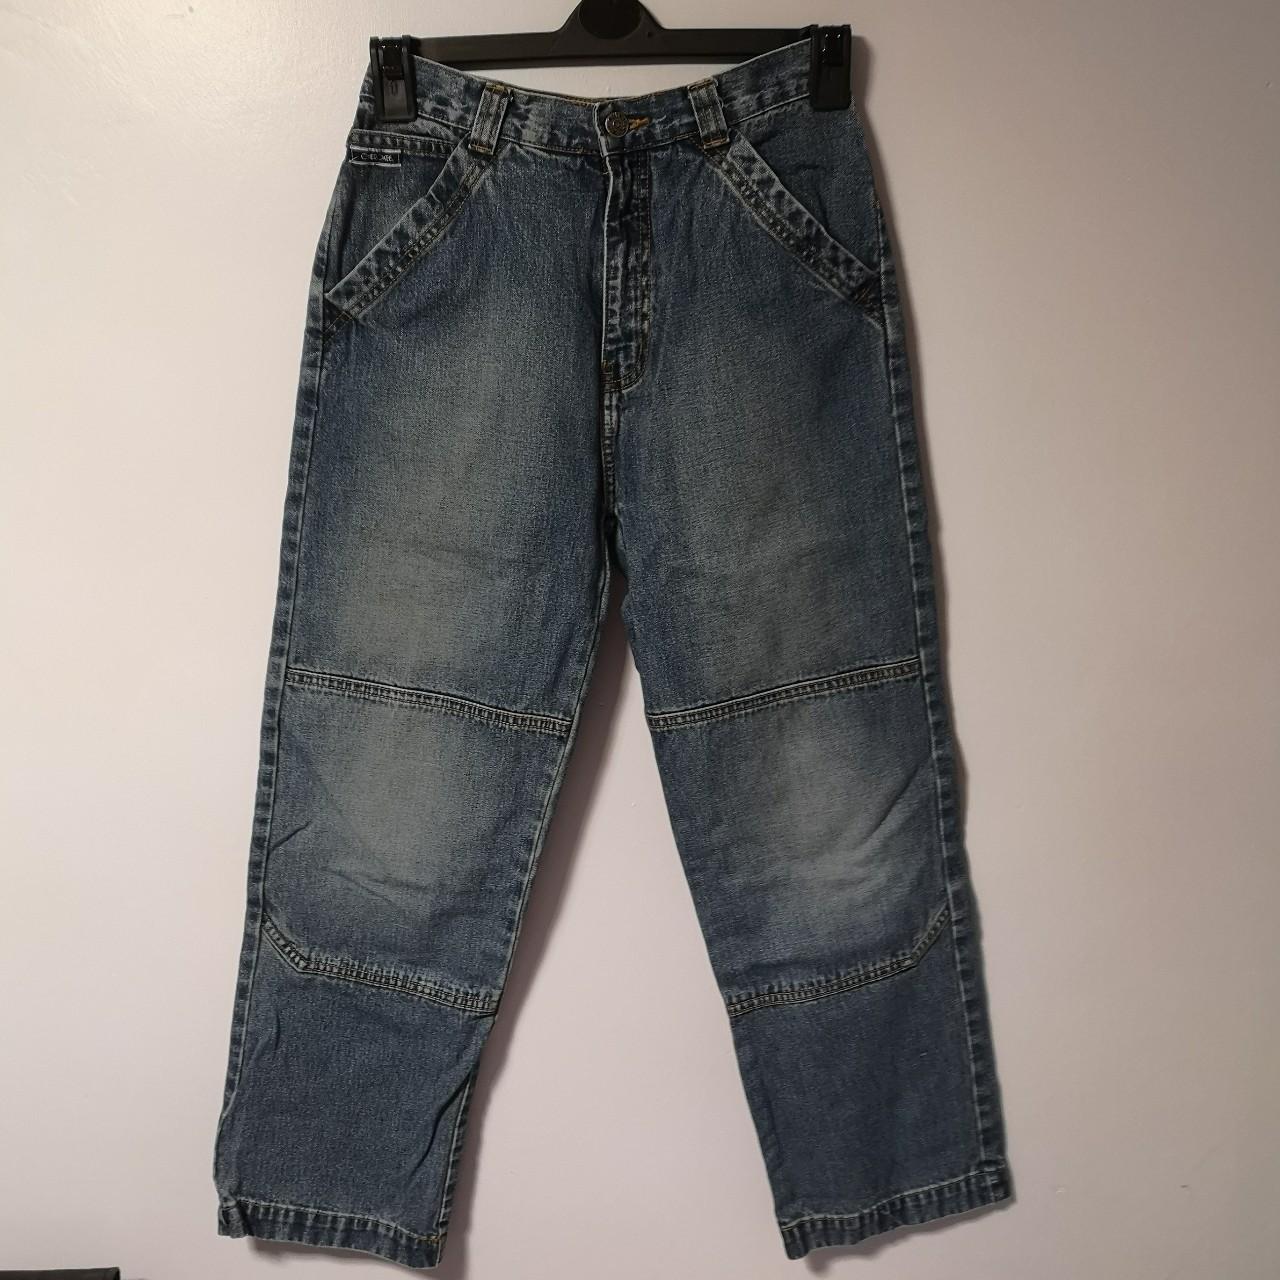 Cherokee jeans. Age 11-12. 26